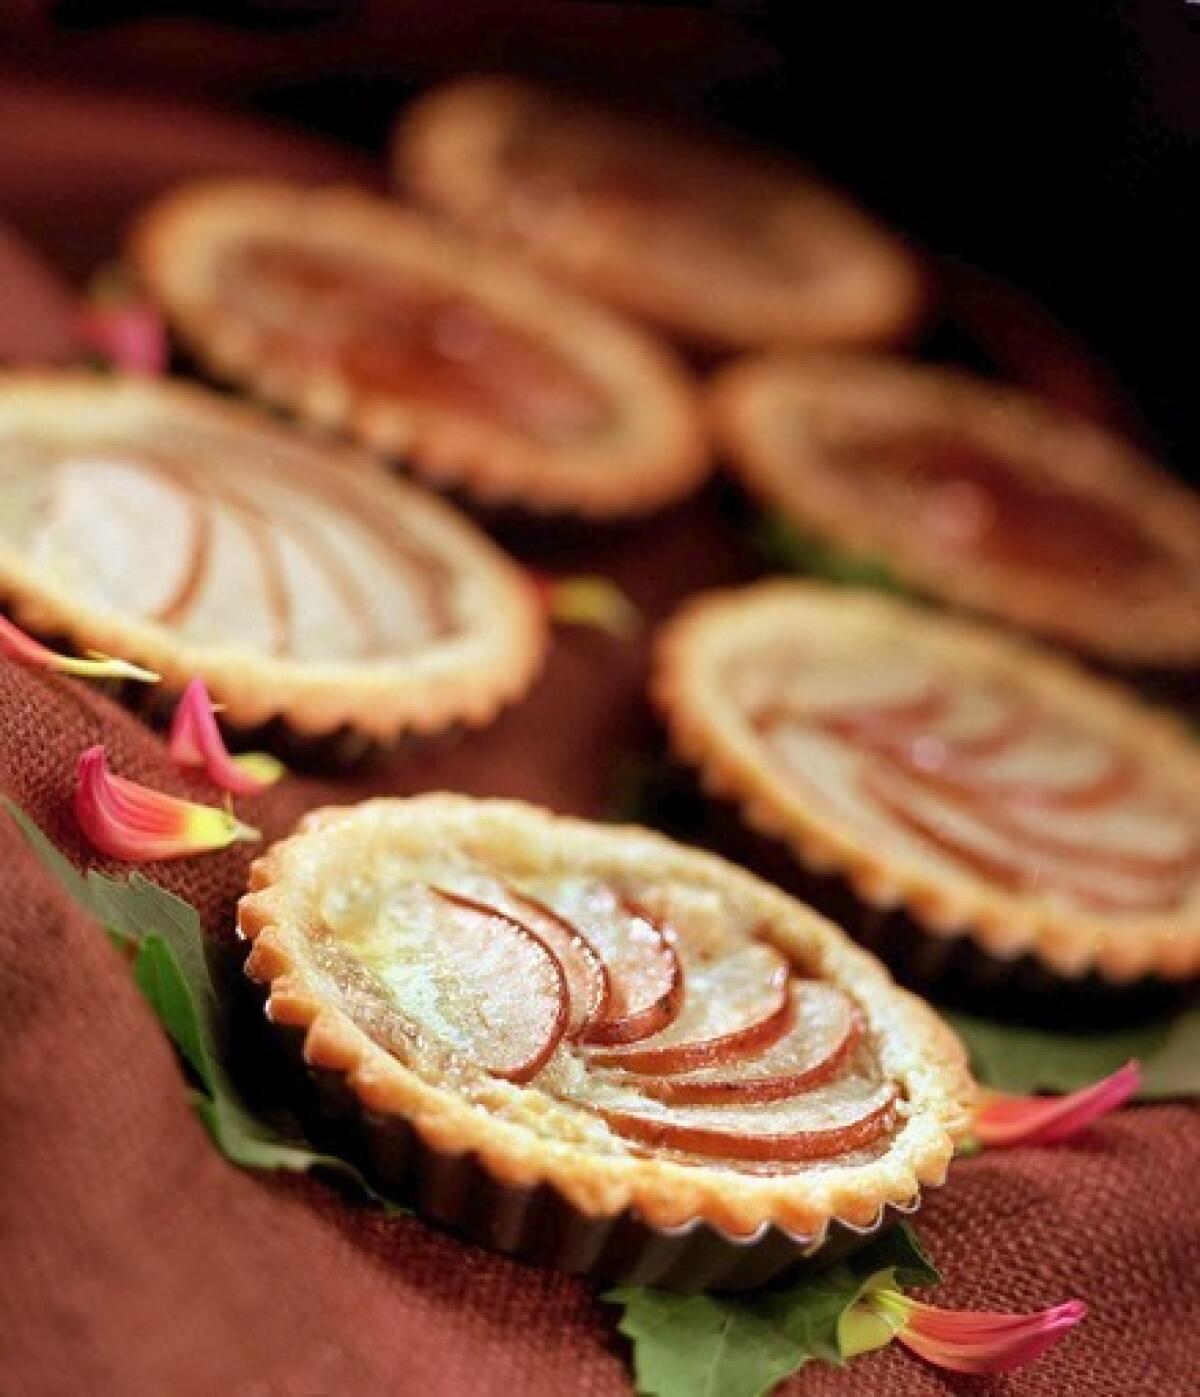 This Asian pear tart by chef Suzanne Tracht of Jozu restaurant has a subtle pear taste and the crispness of a firm apple. Recipe: Pear tart